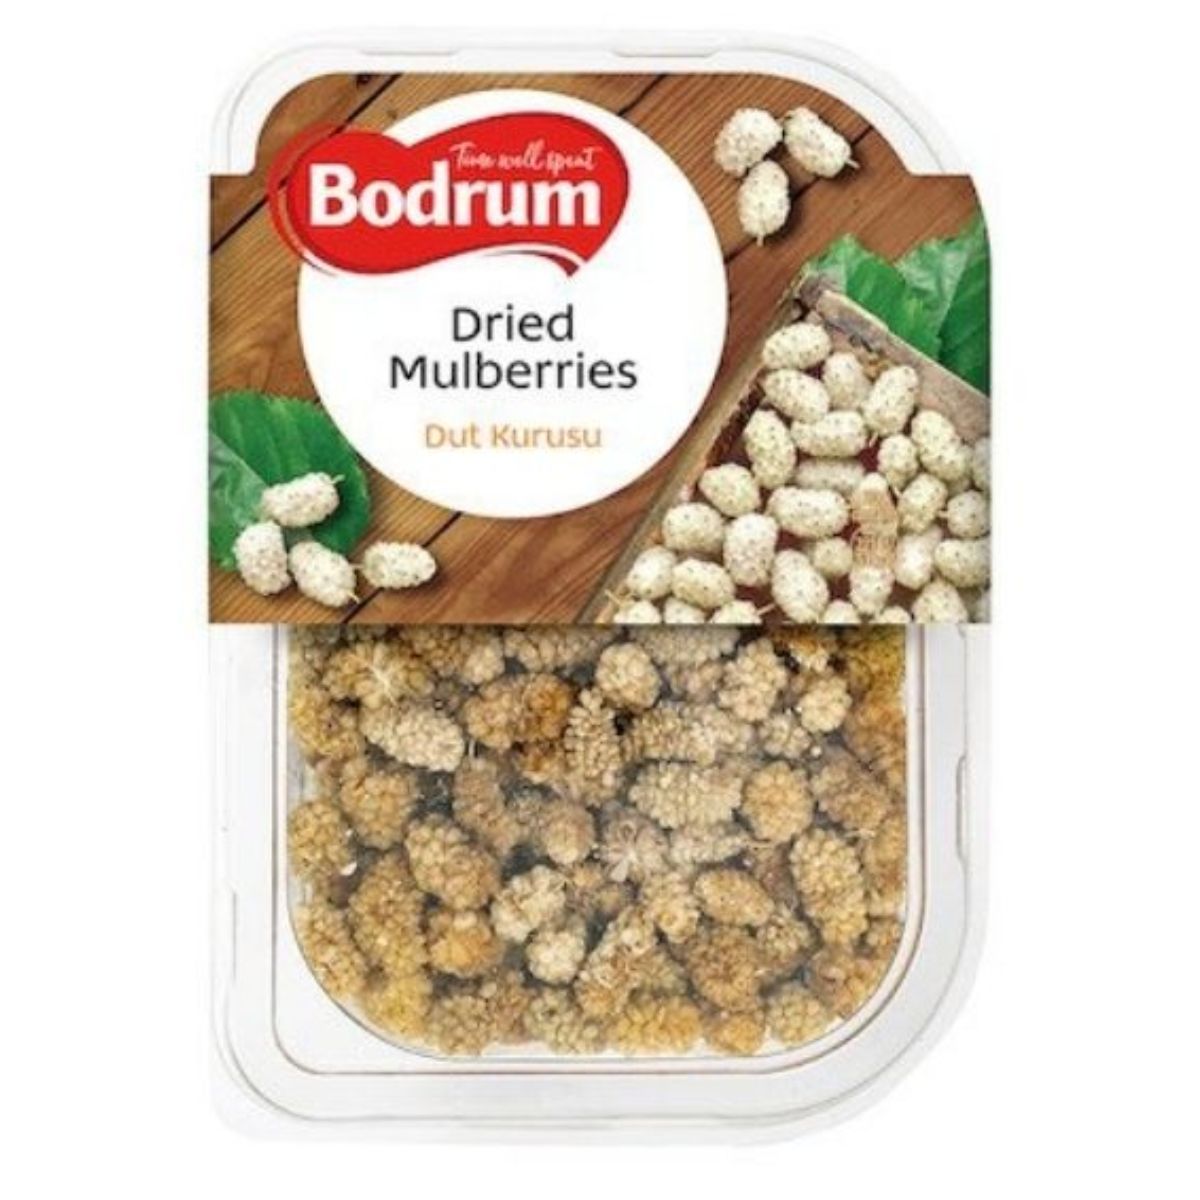 A Bodrum - Dried Mulberries - 150g.